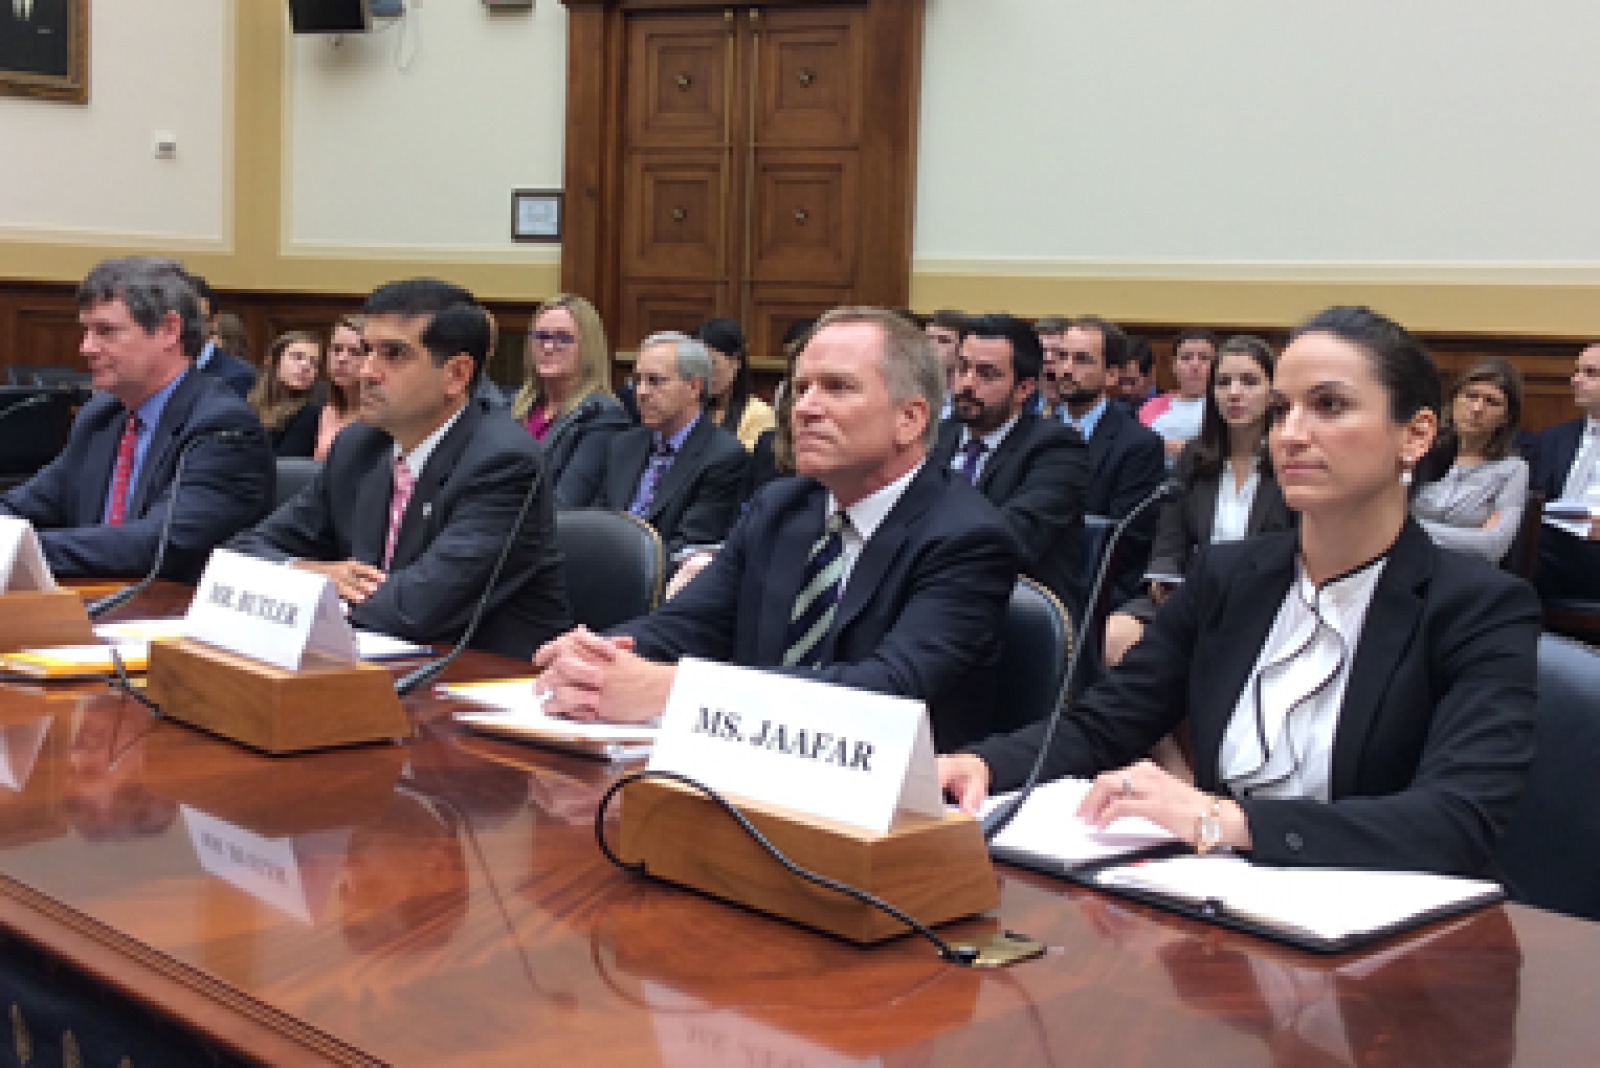 NDI's Lila Jaafar Testifies Before Congress on "The Struggle for Civil Society in Egypt"